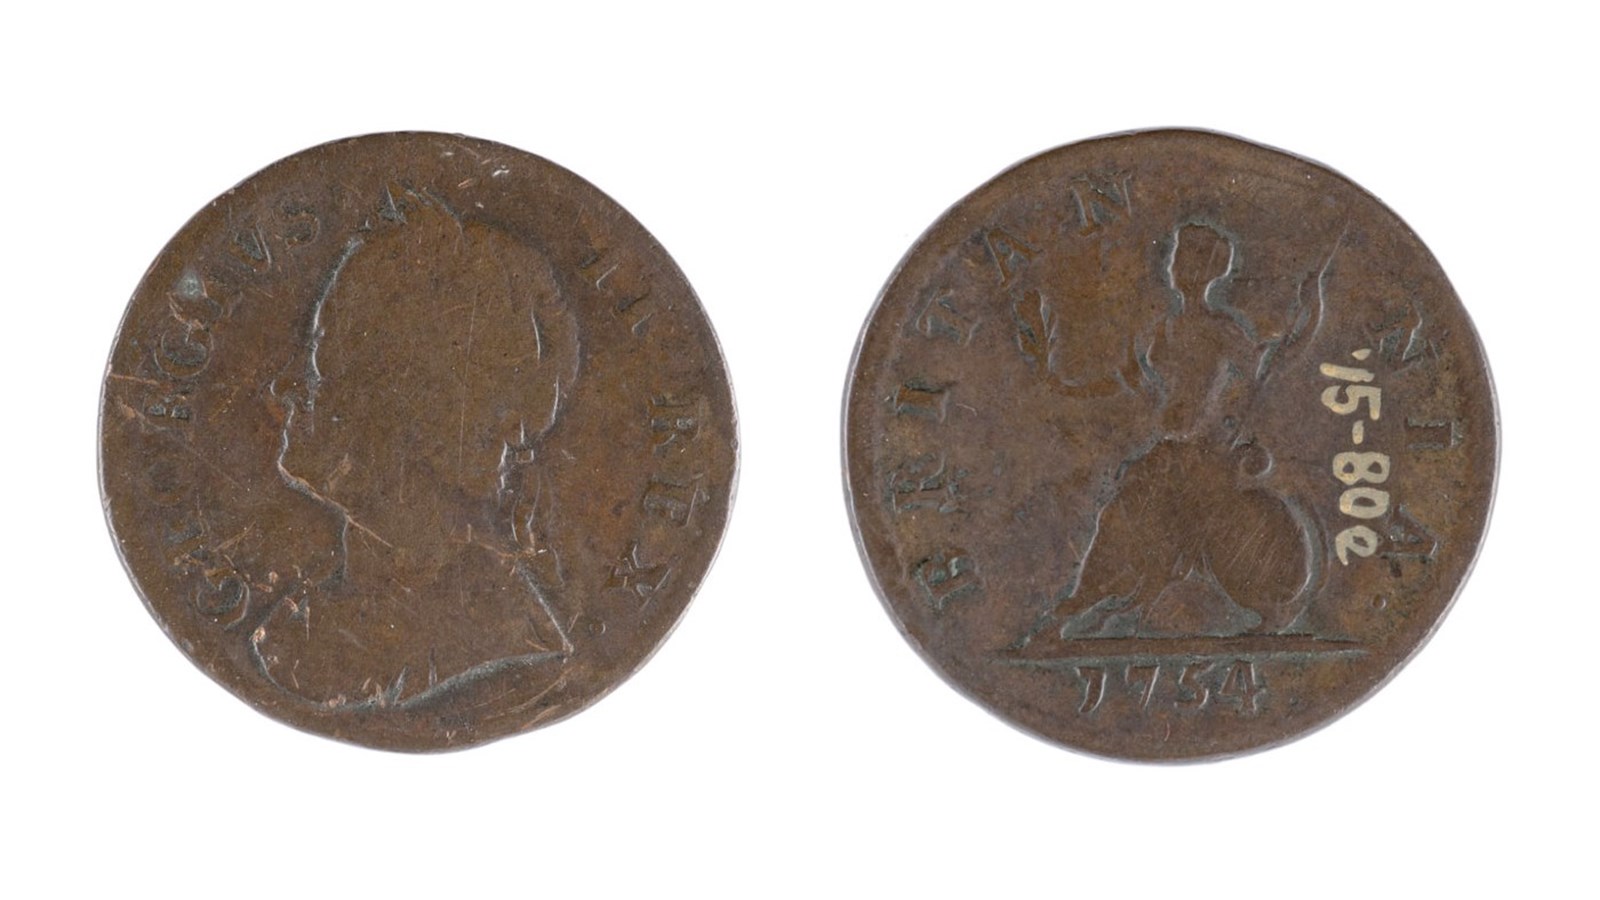 the front and back sides of a brown coin showing a low relief of a persons head on either side.